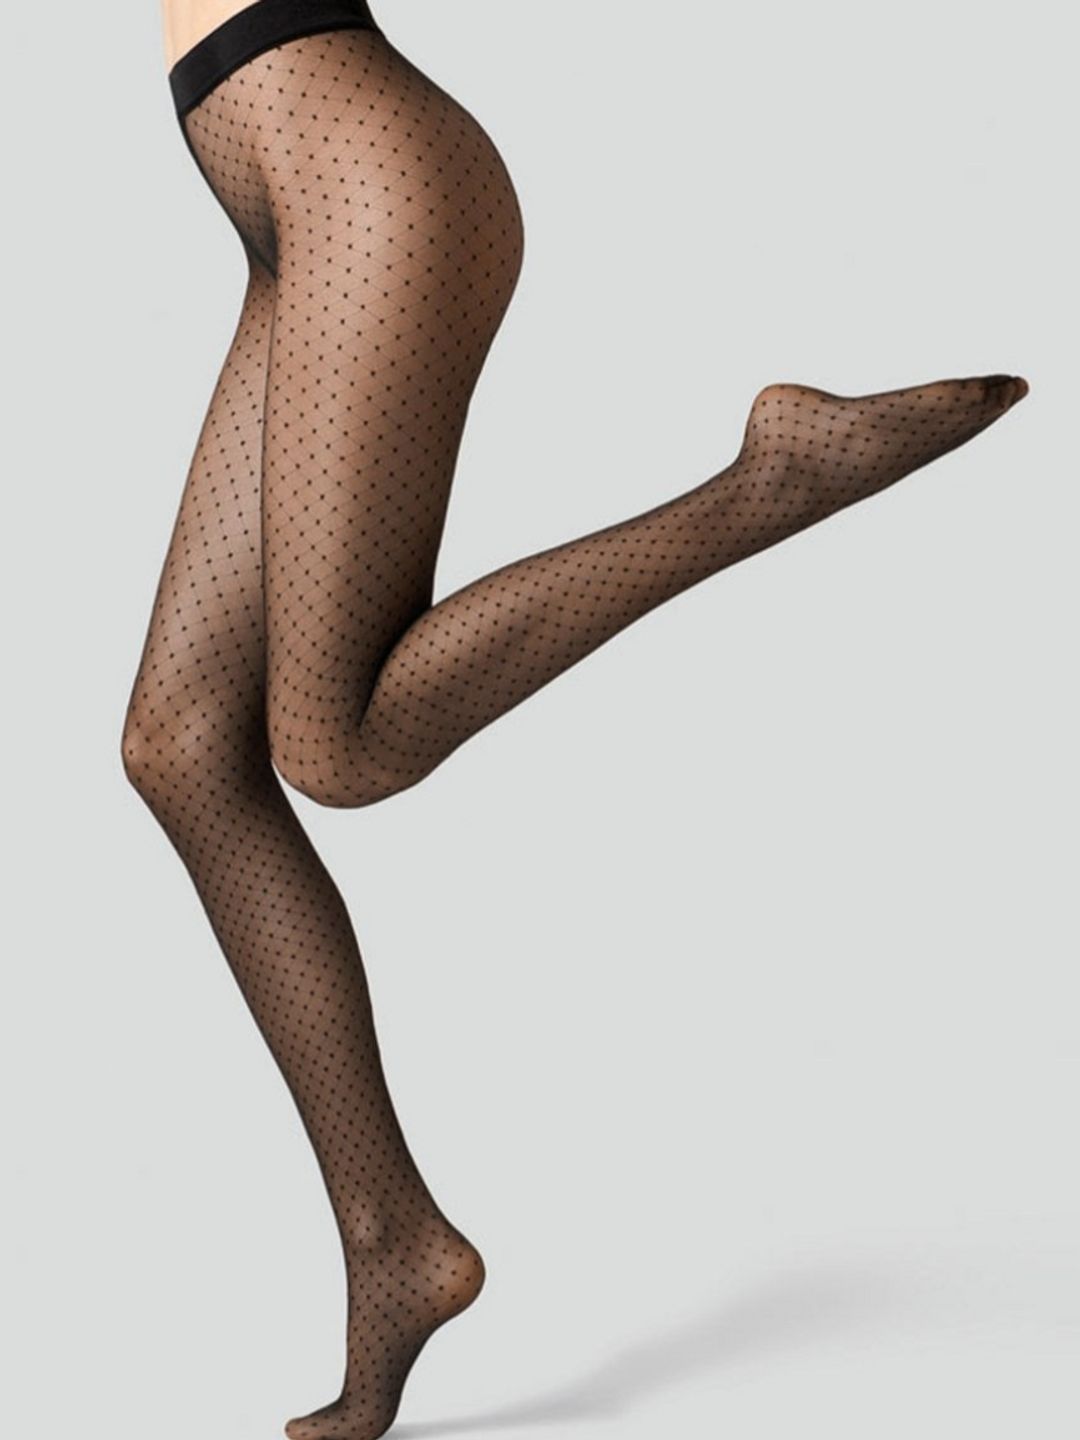 12 luxury hosiery brands to shop for quality tights and socks in